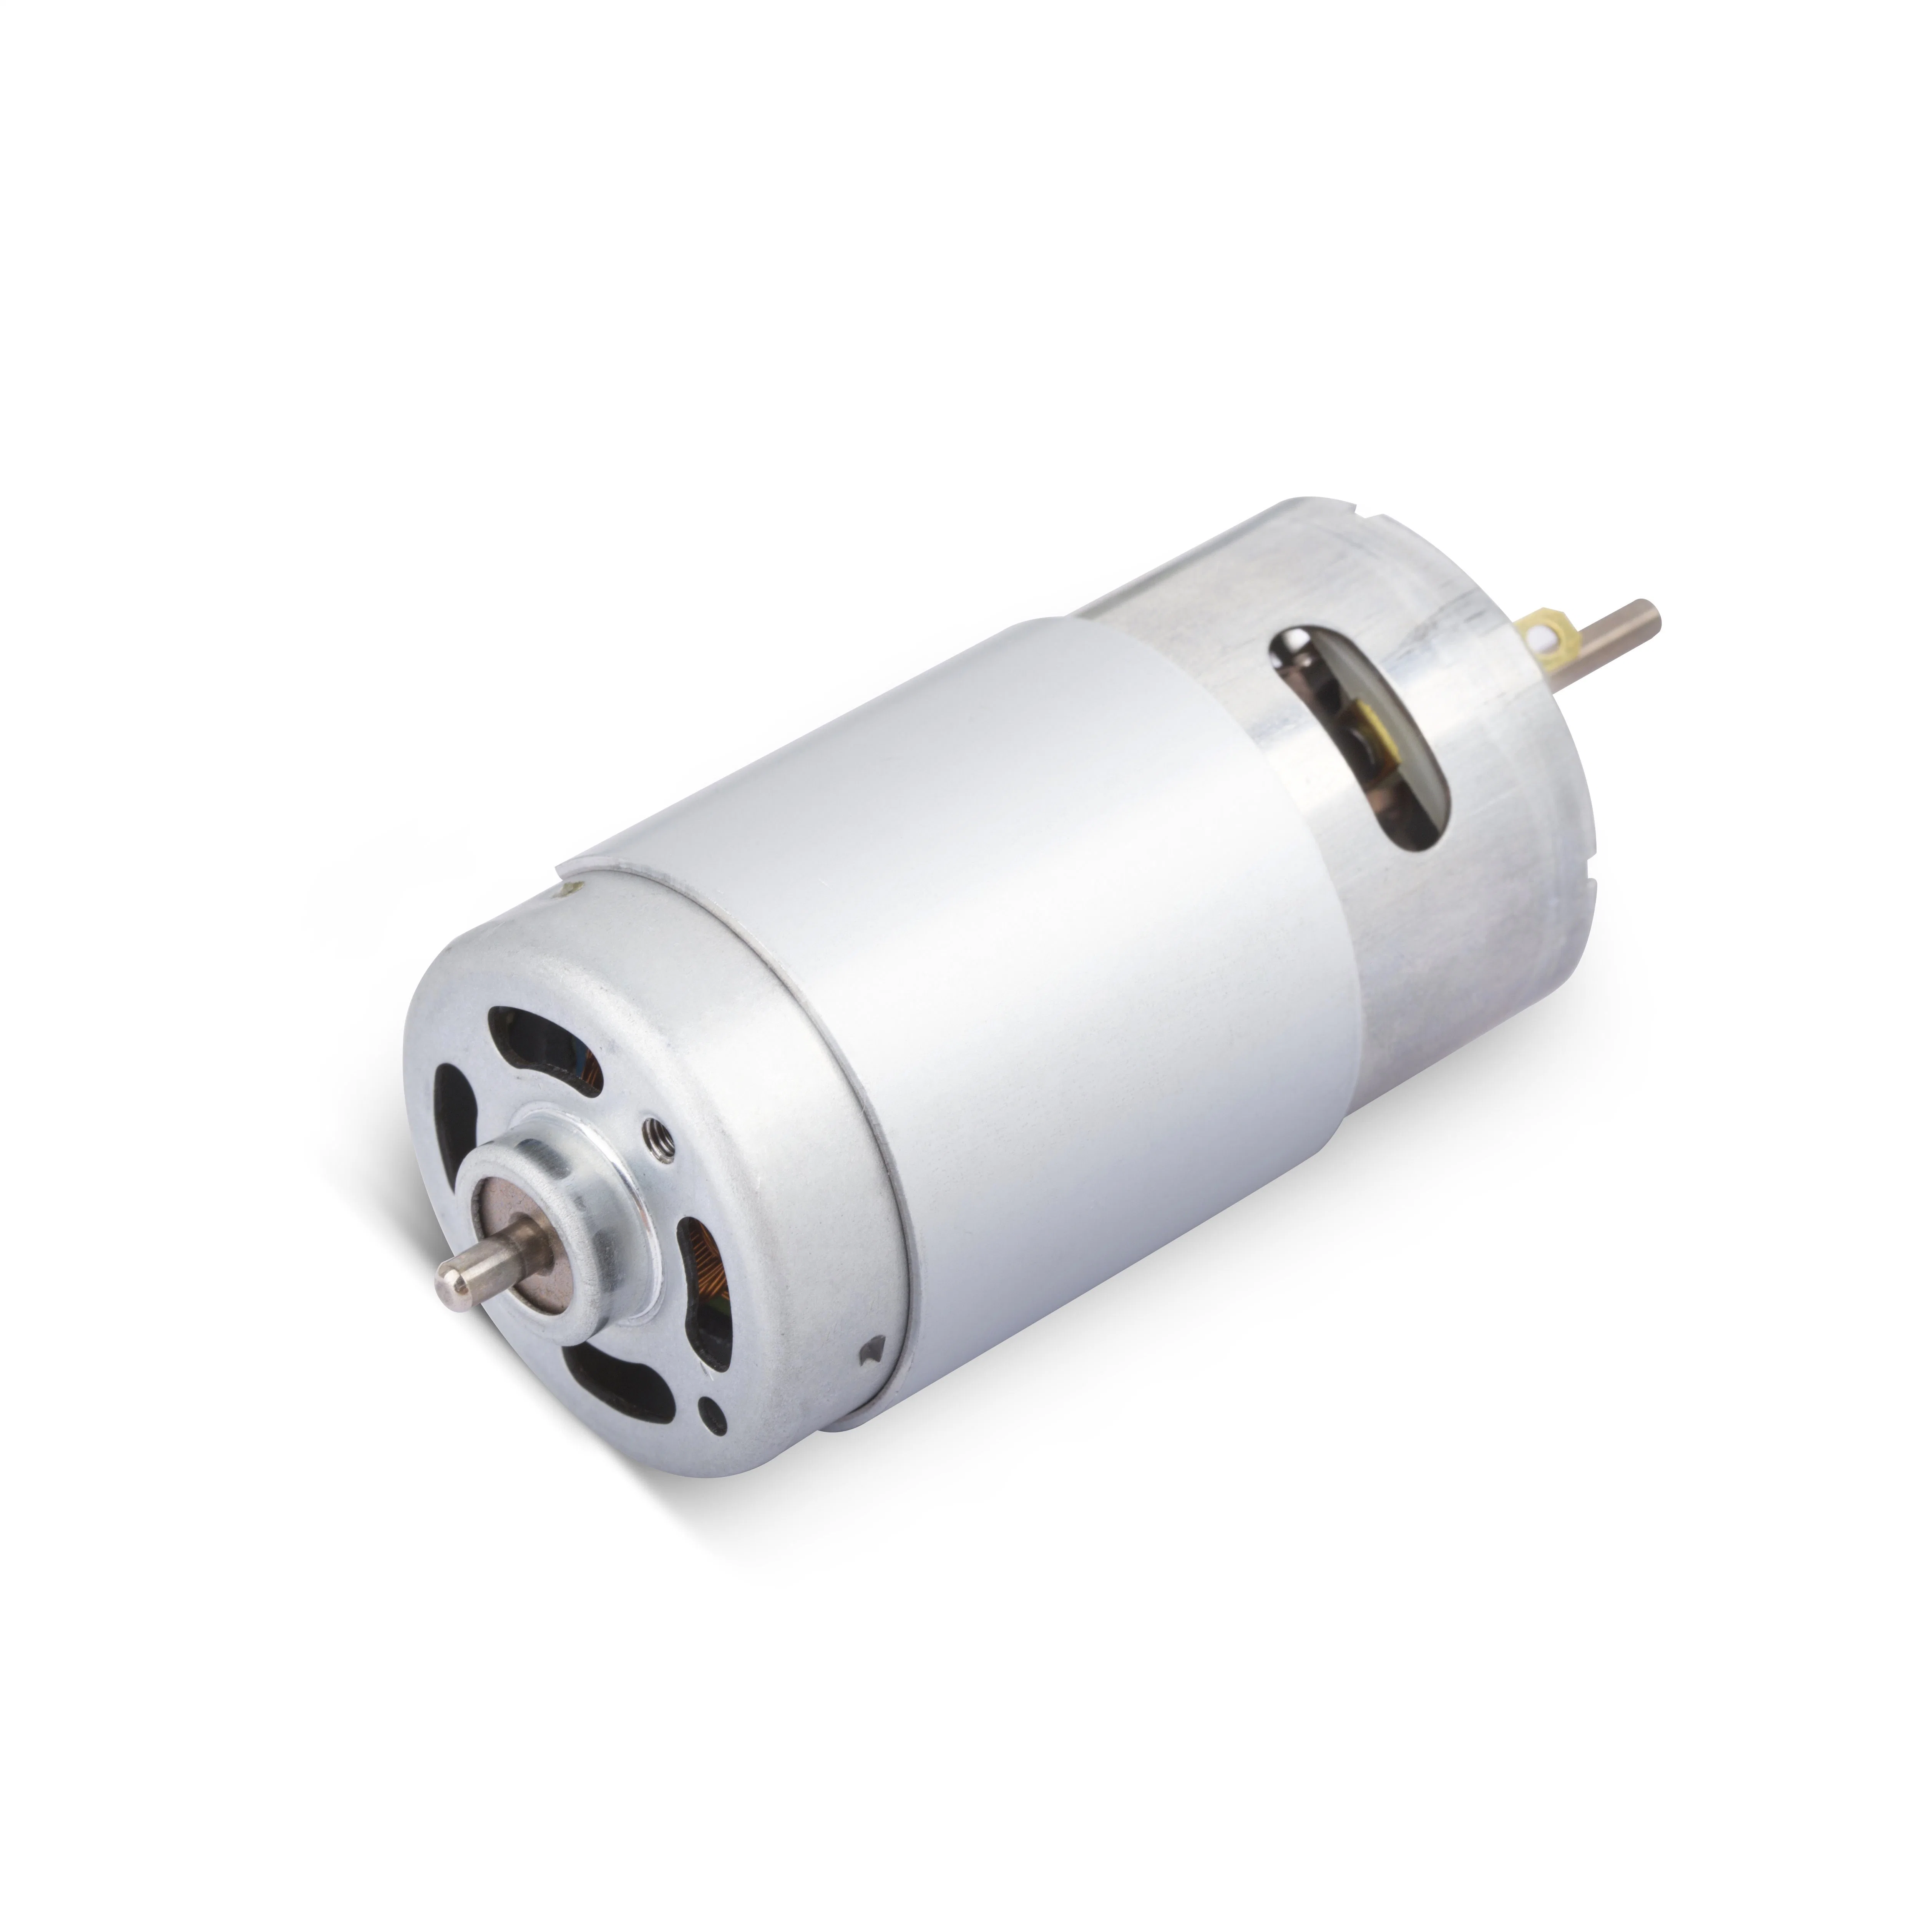 Vehicle 24V DC Motors DC Electric Motor Stable Performance for Automotive Parts